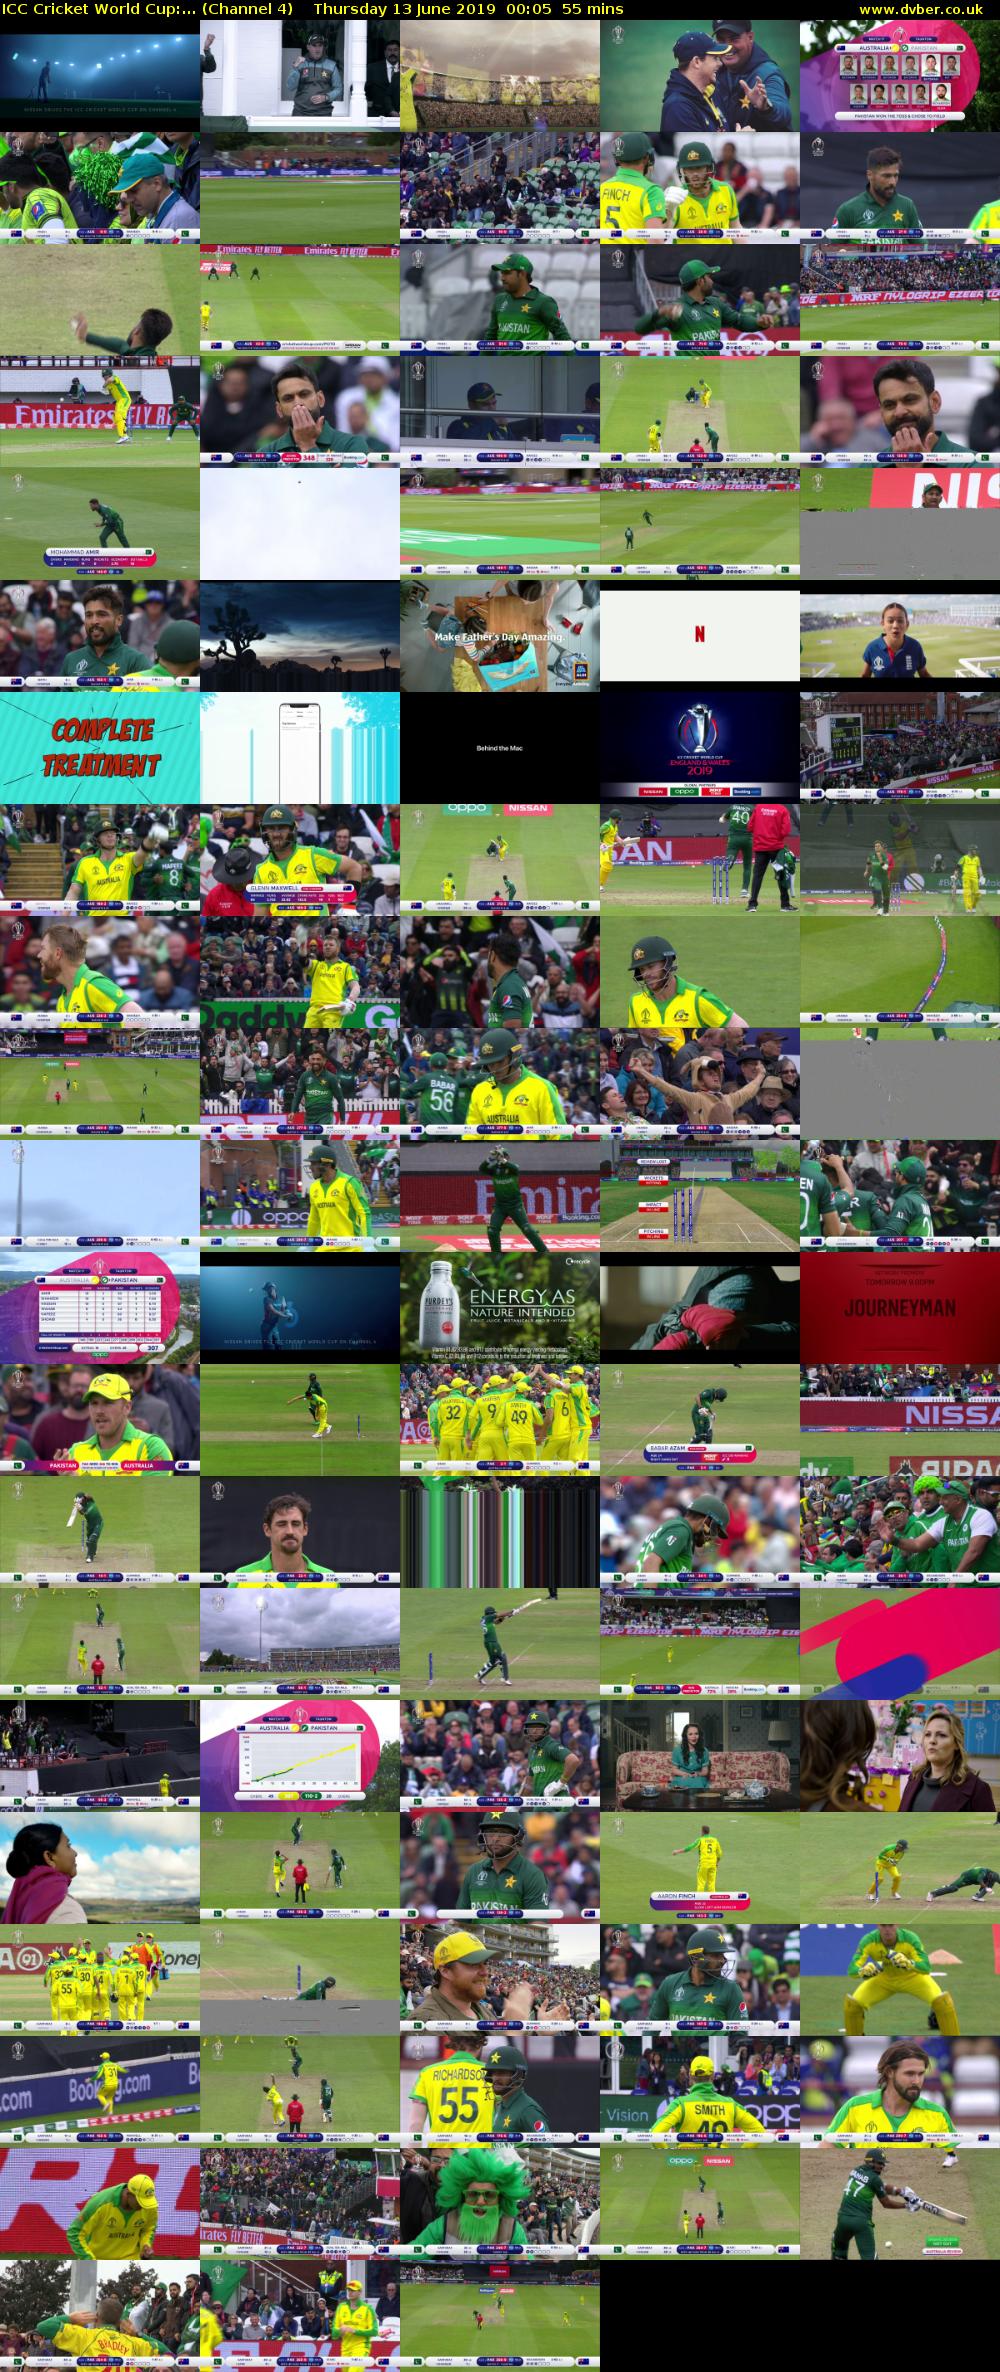 ICC Cricket World Cup:... (Channel 4) Thursday 13 June 2019 00:05 - 01:00